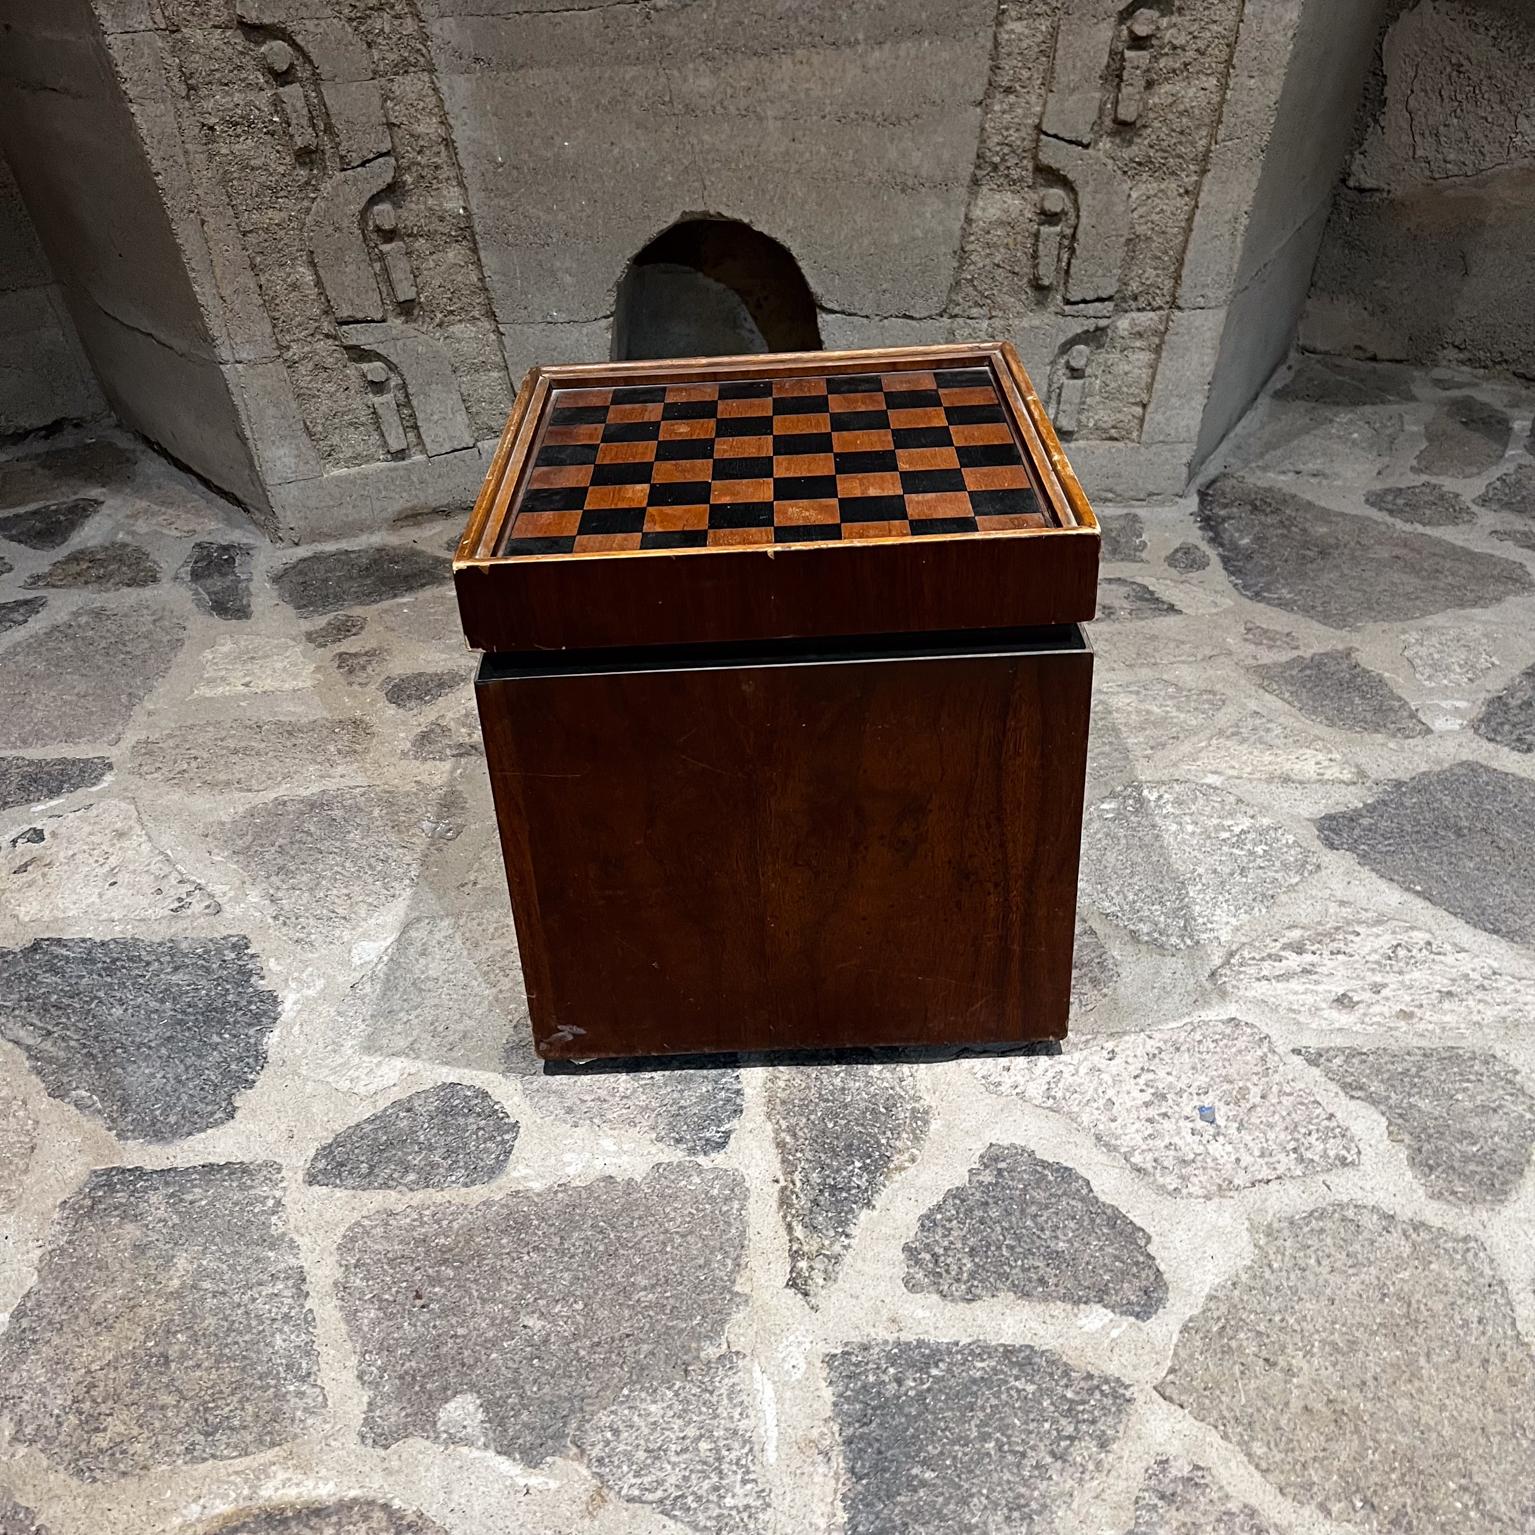 1960s by Lane Walnut and Vinyl Chess Table with Storage
Storage Box or Side Table
Reversible faux leather cover on one side game board on the other!
27.25 h x 16 x 16
Original unrestored vintage condition
Refer to all images.